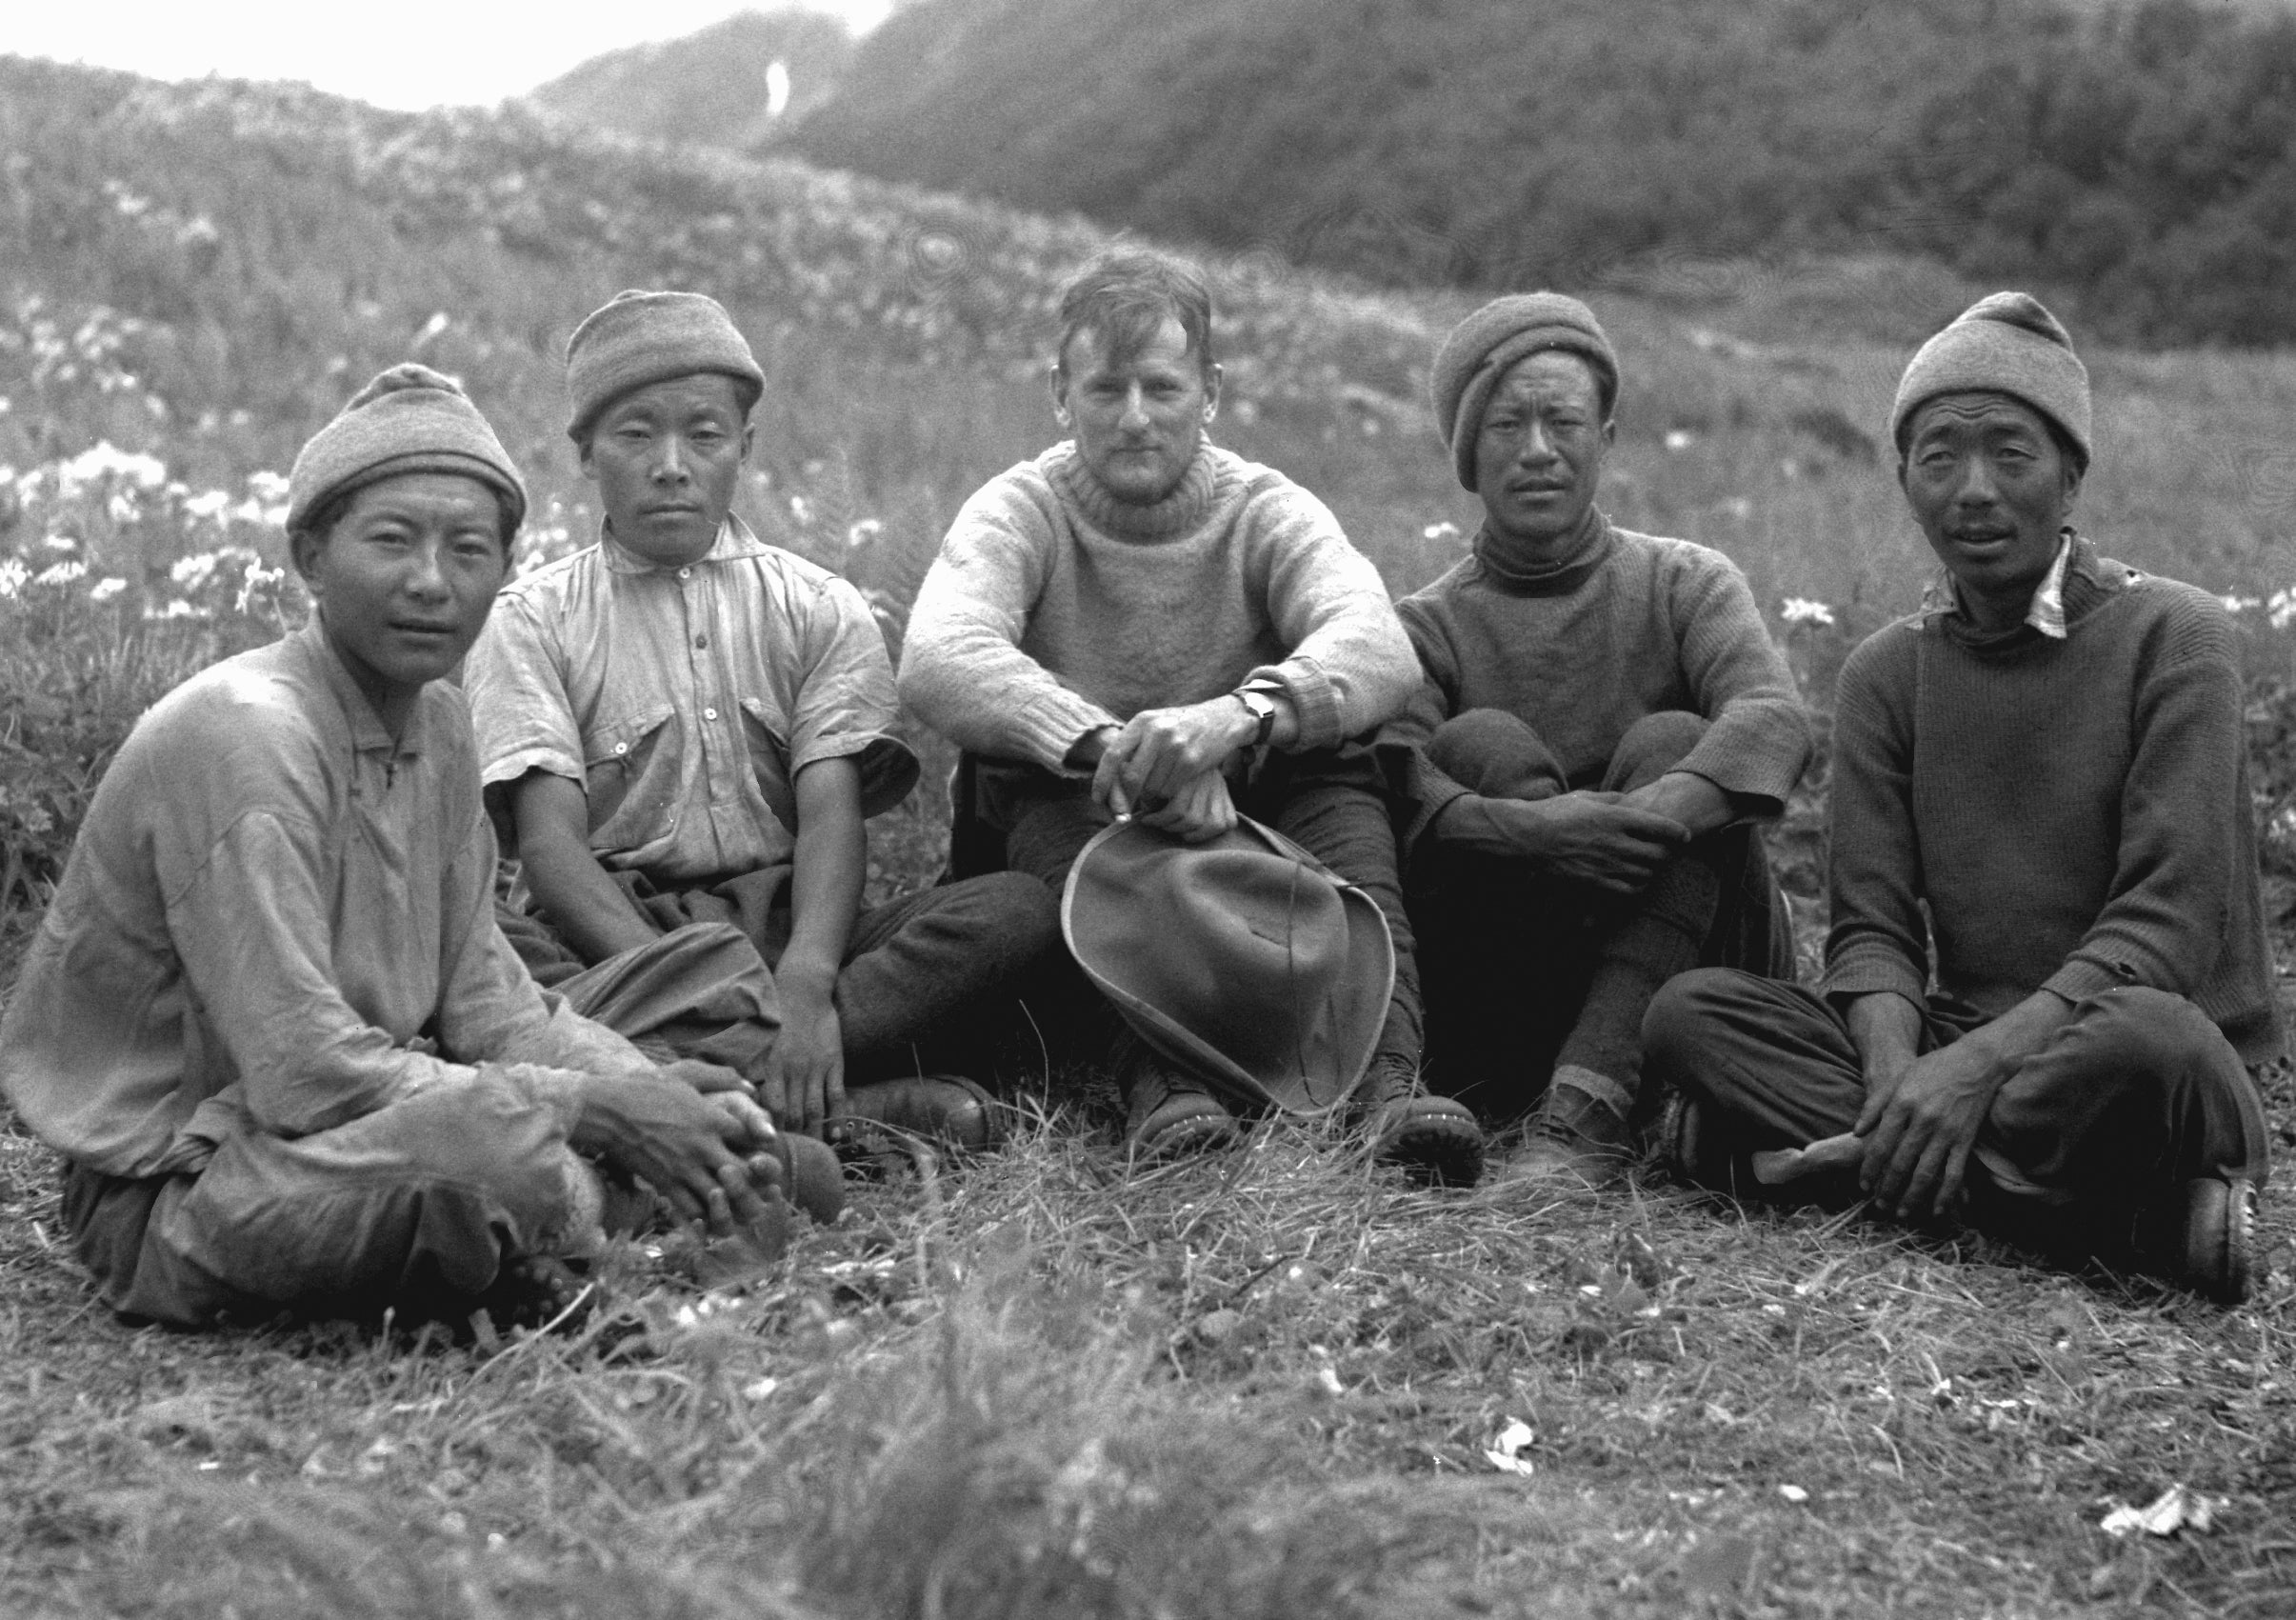 A photograph of five climbers in 1937—four of them are Sherpas. 